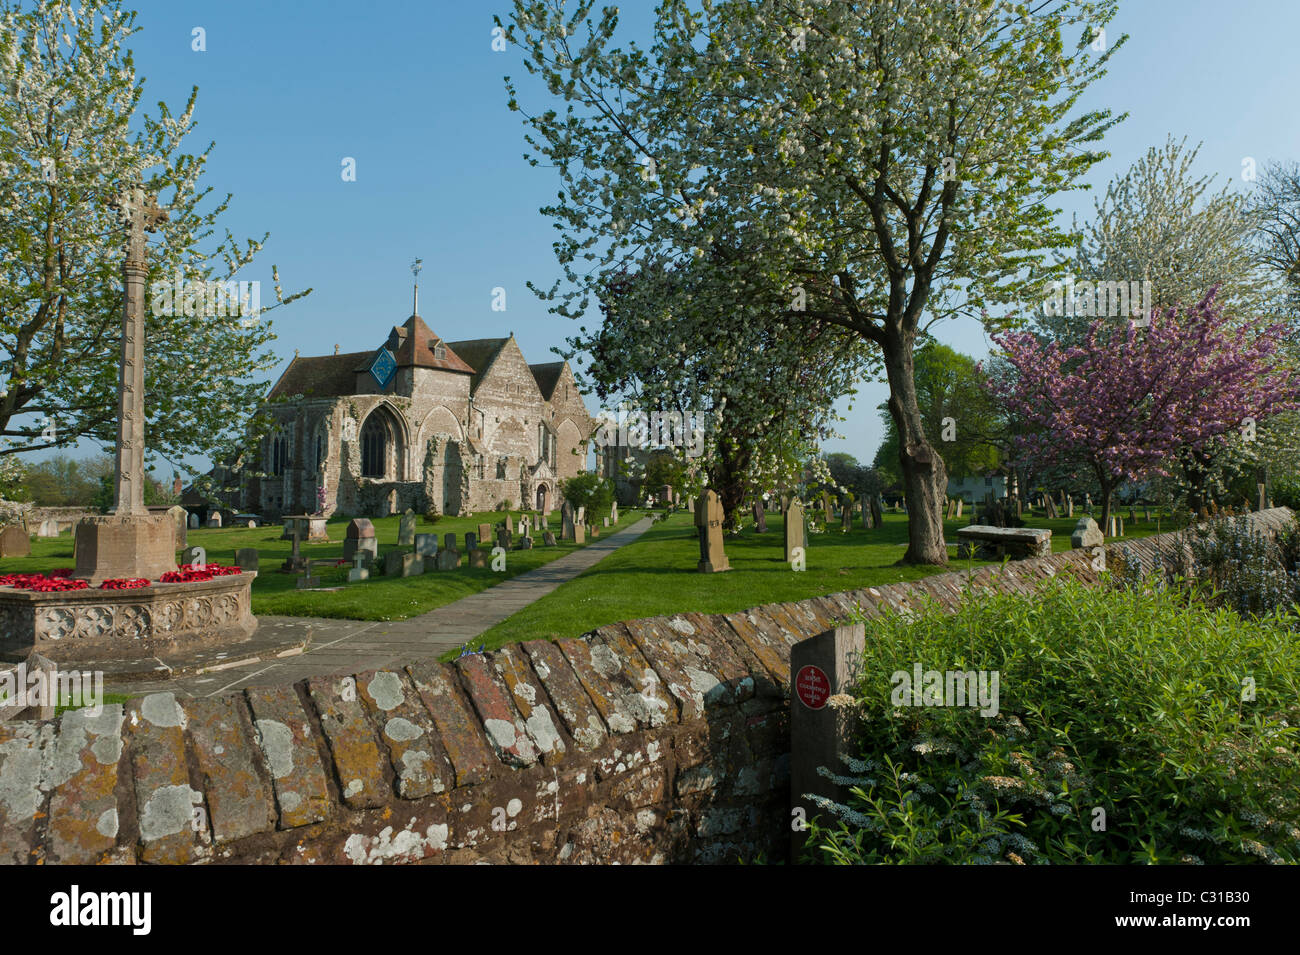 The Church of St Thomas the Martyr. Winchelsea, East Sussex Southern England UK Stock Photo